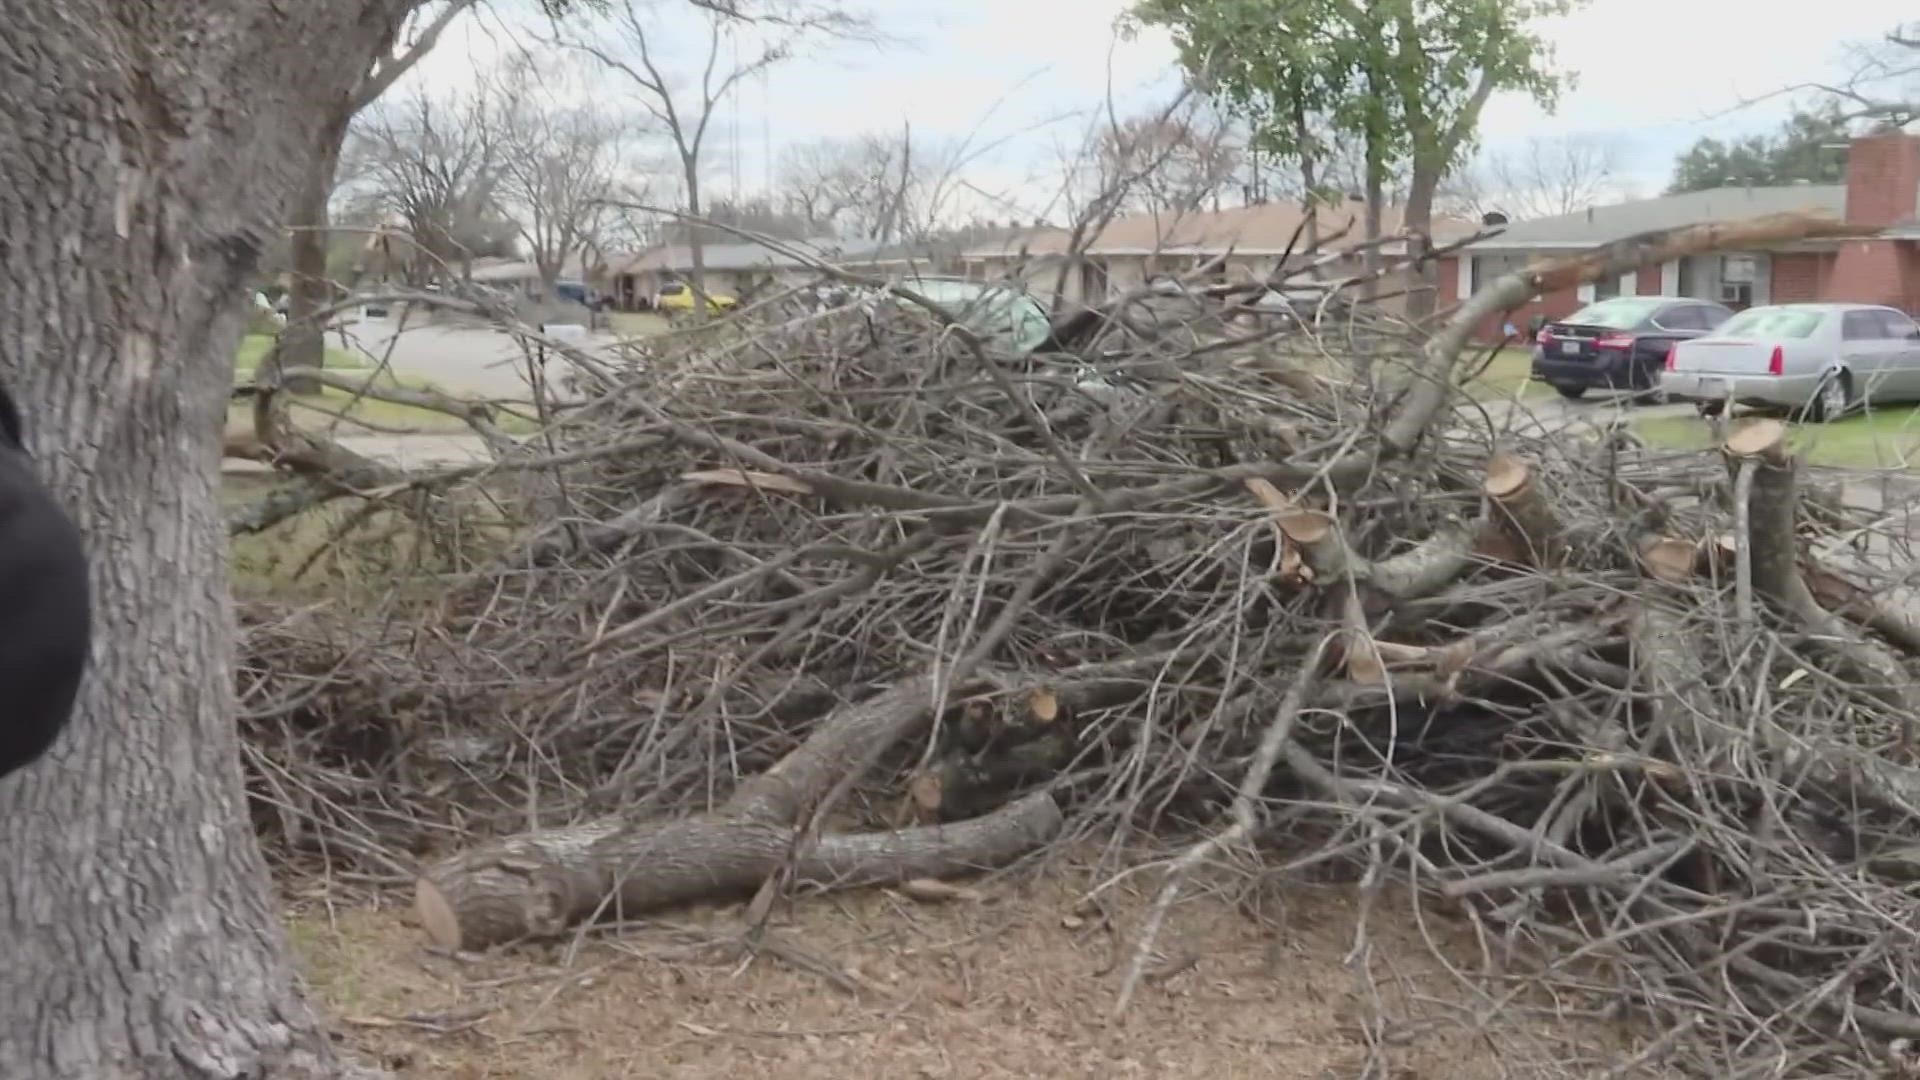 Bobbie McBride was told she would have to wait two weeks and pay $300-800 for tree removal services, but 6 News and the city had it cleaned up in a matter of hours.